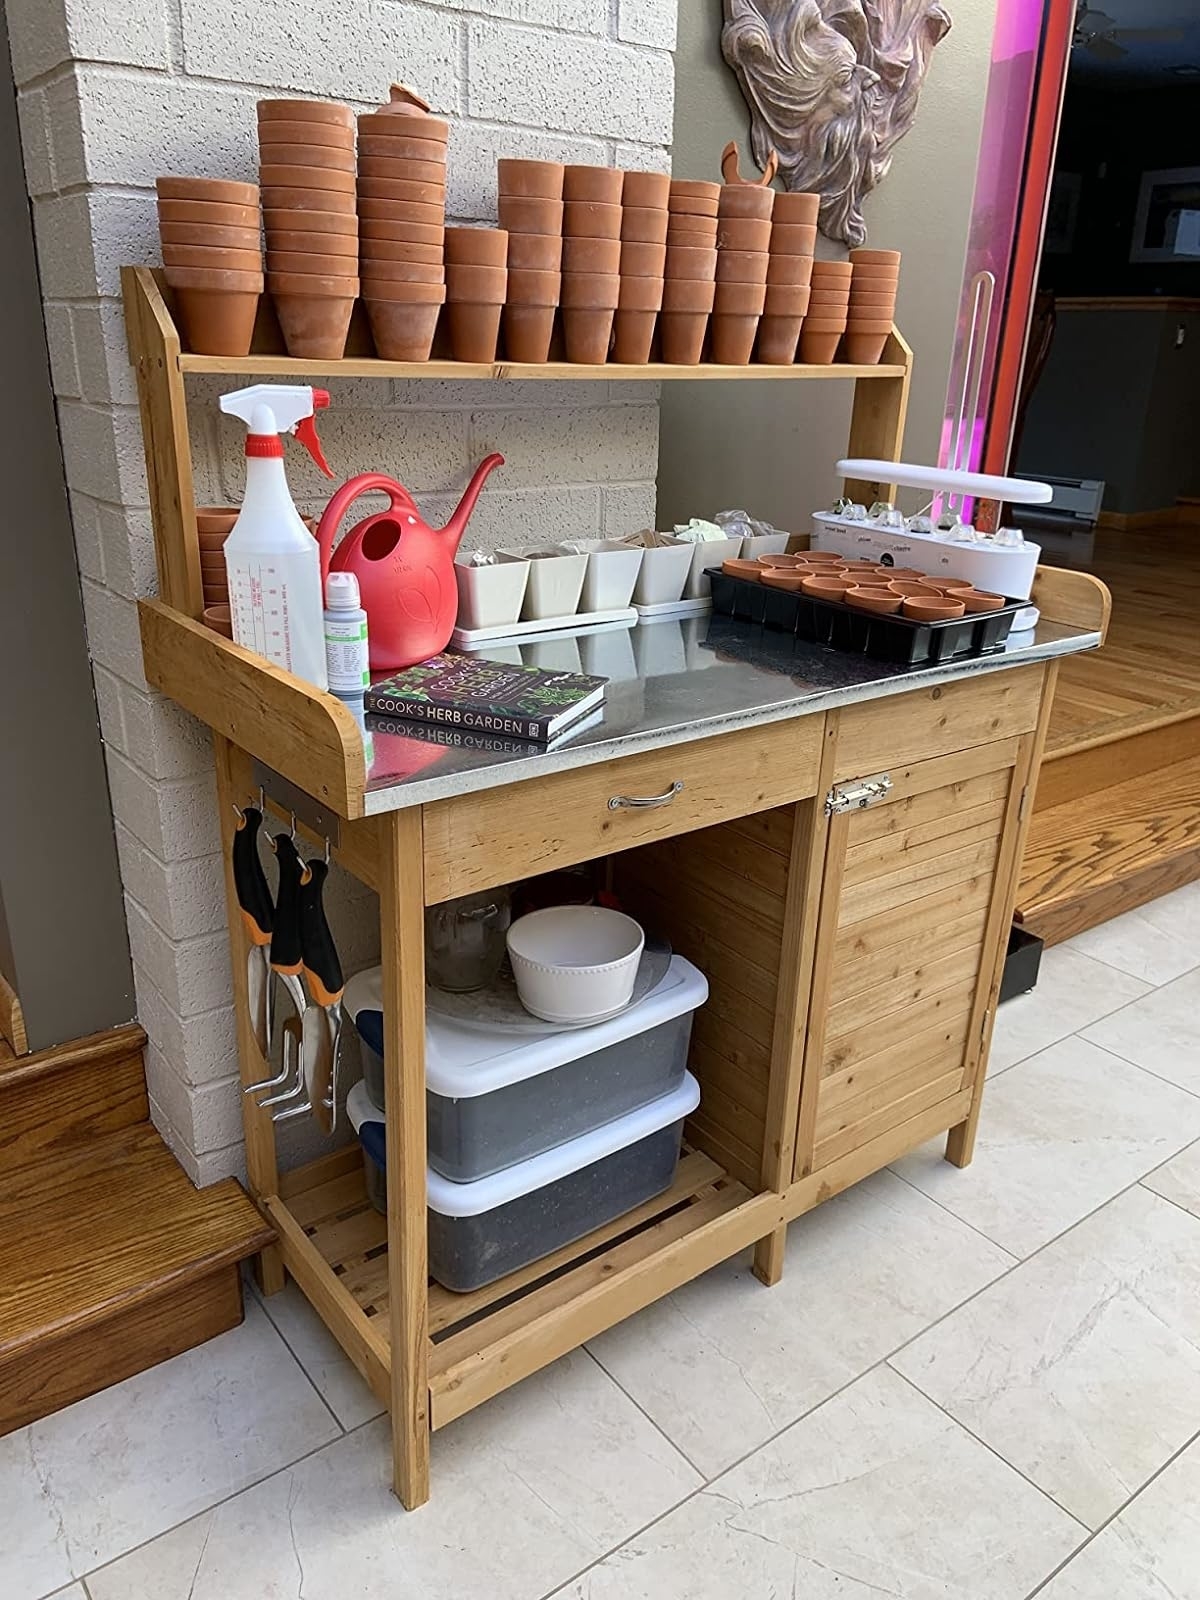 Wooden gardening station with shelves, supplies, and pots, showcasing storage solutions for garden tools and accessories